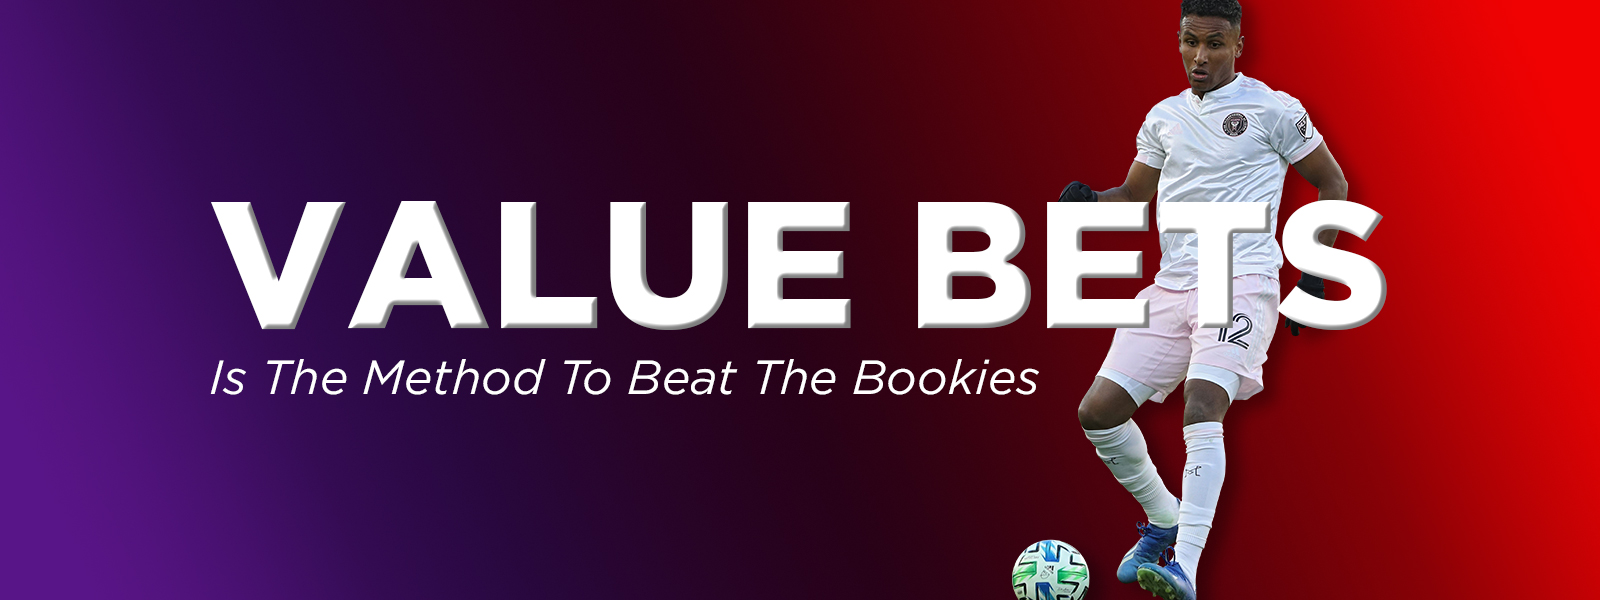 Value Bets Is The Best Method To Beat The Bookies